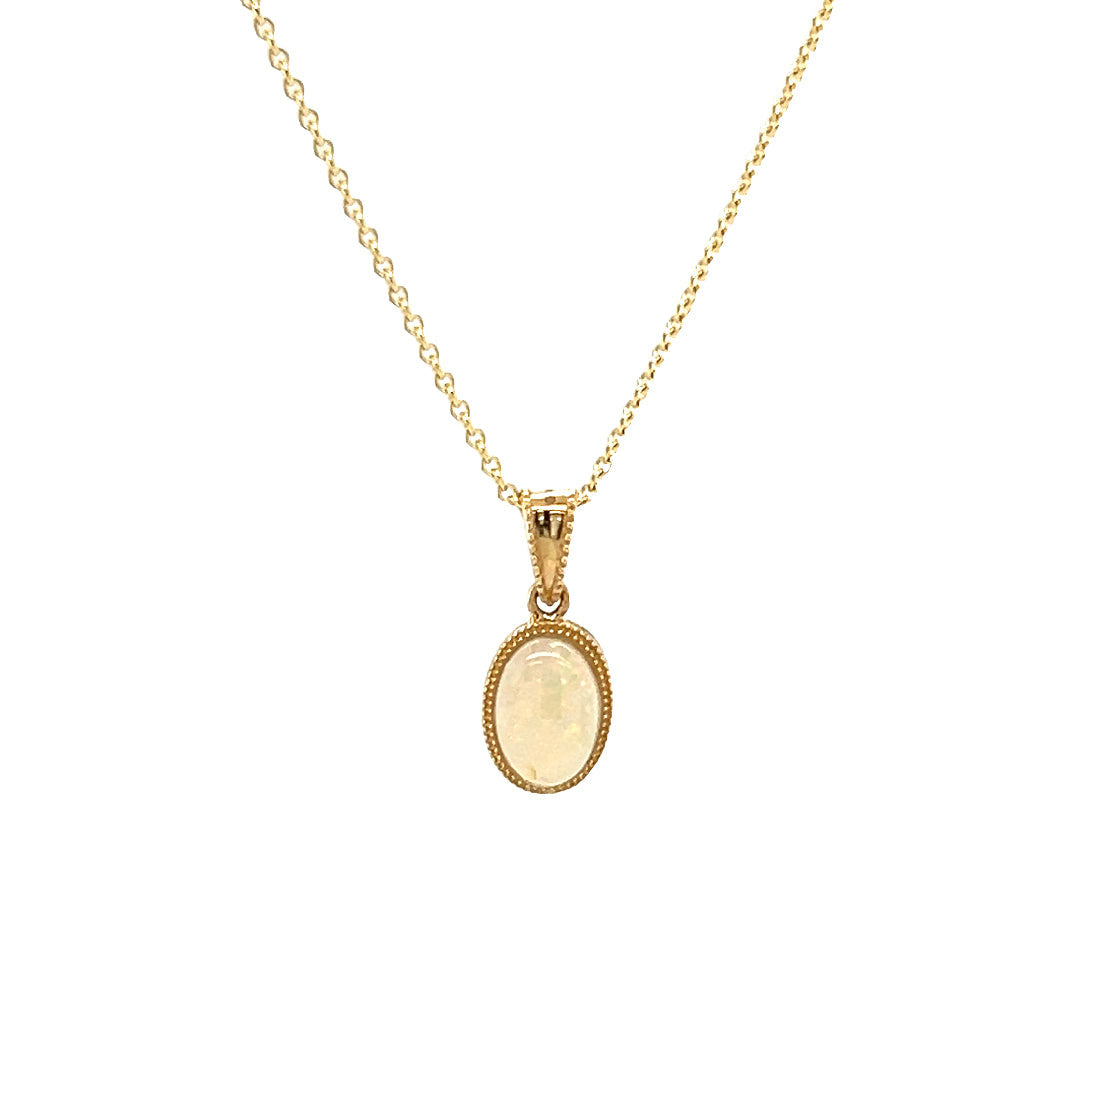 White Opal Pendant with Engraving and Milgrain Details in 14K Yellow Gold Pendant and Chain Front View